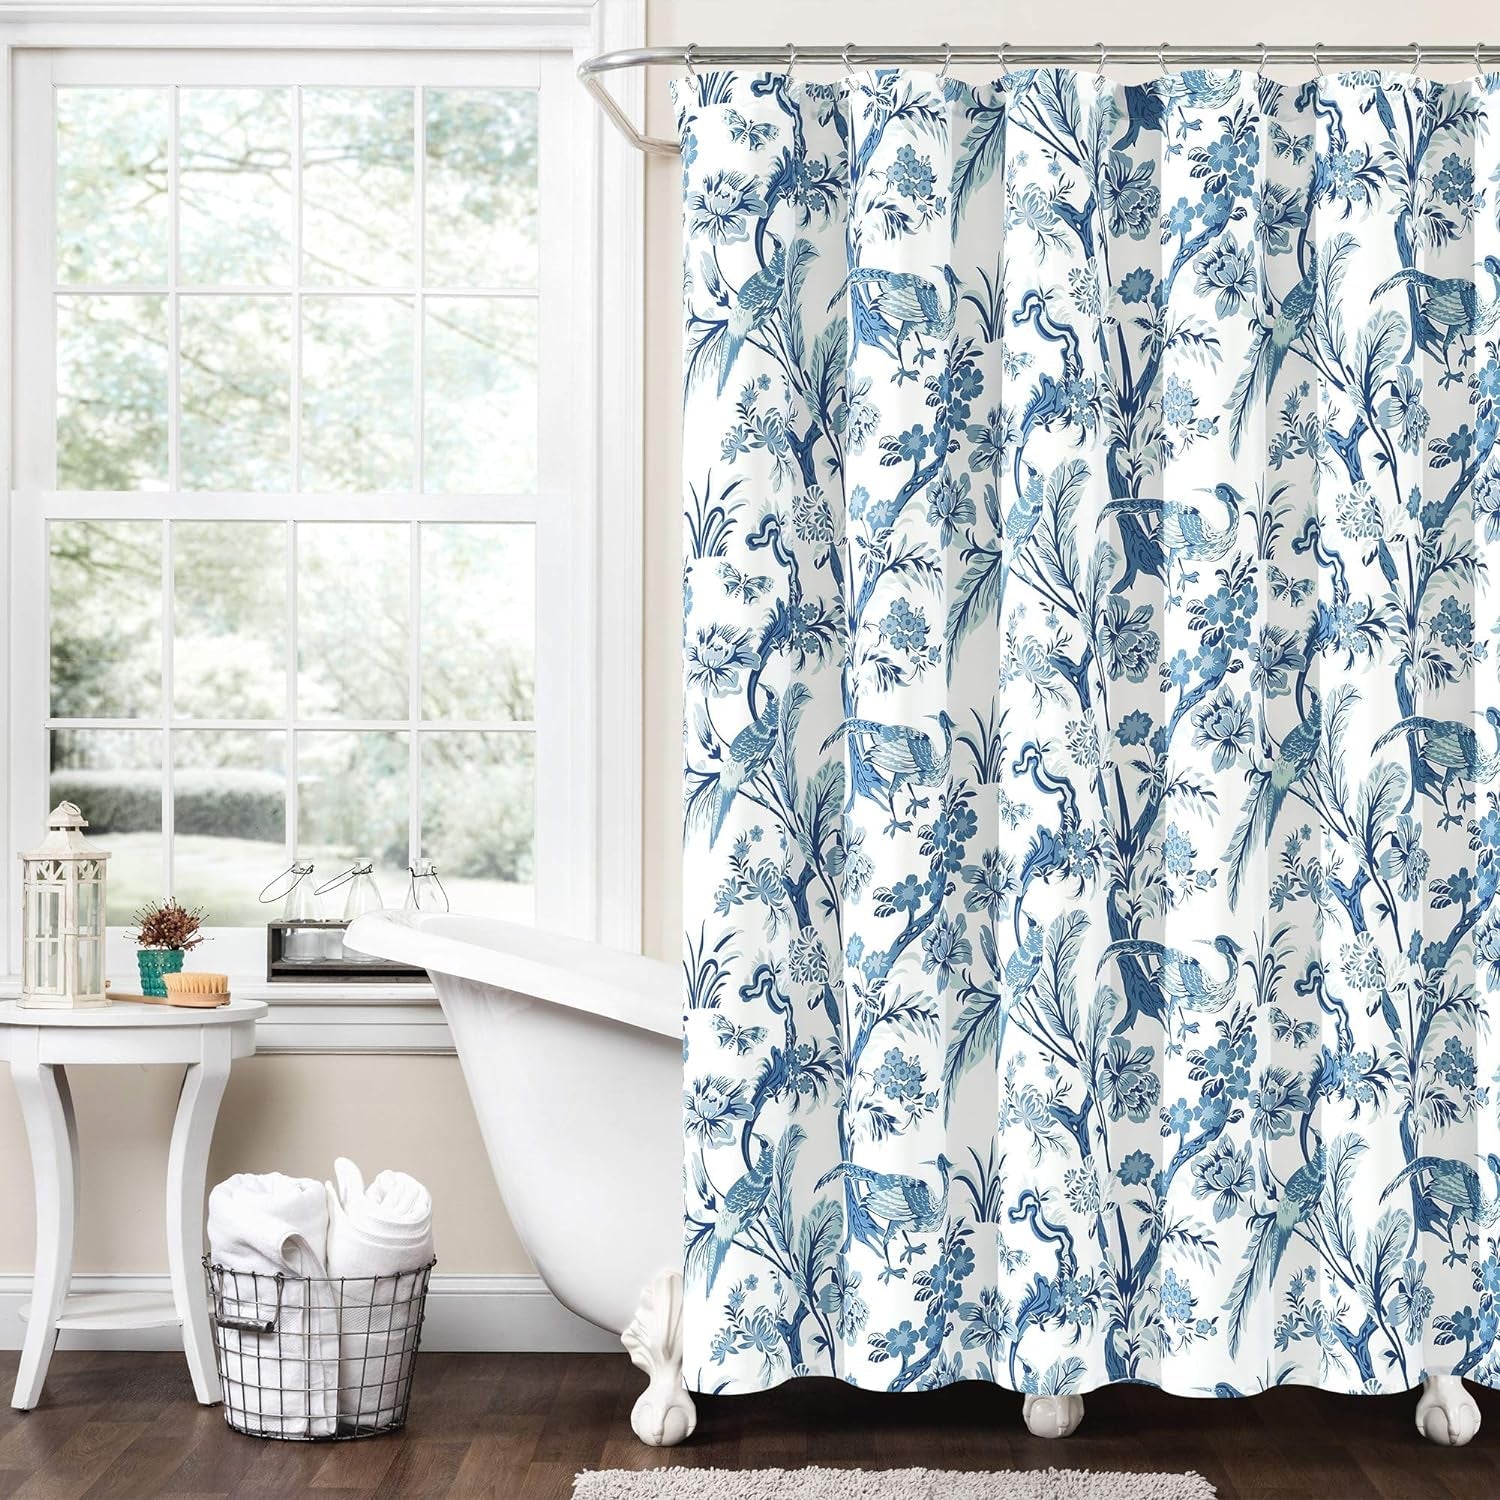 Lush Decor Dolores Shower Curtain,72" W X 72" L, Yellow - Toile Shower Curtain - Bold Blue and Yellow Shower Curtain - Bird & Floral Print - Maximalist & French Country Bathroom Decor